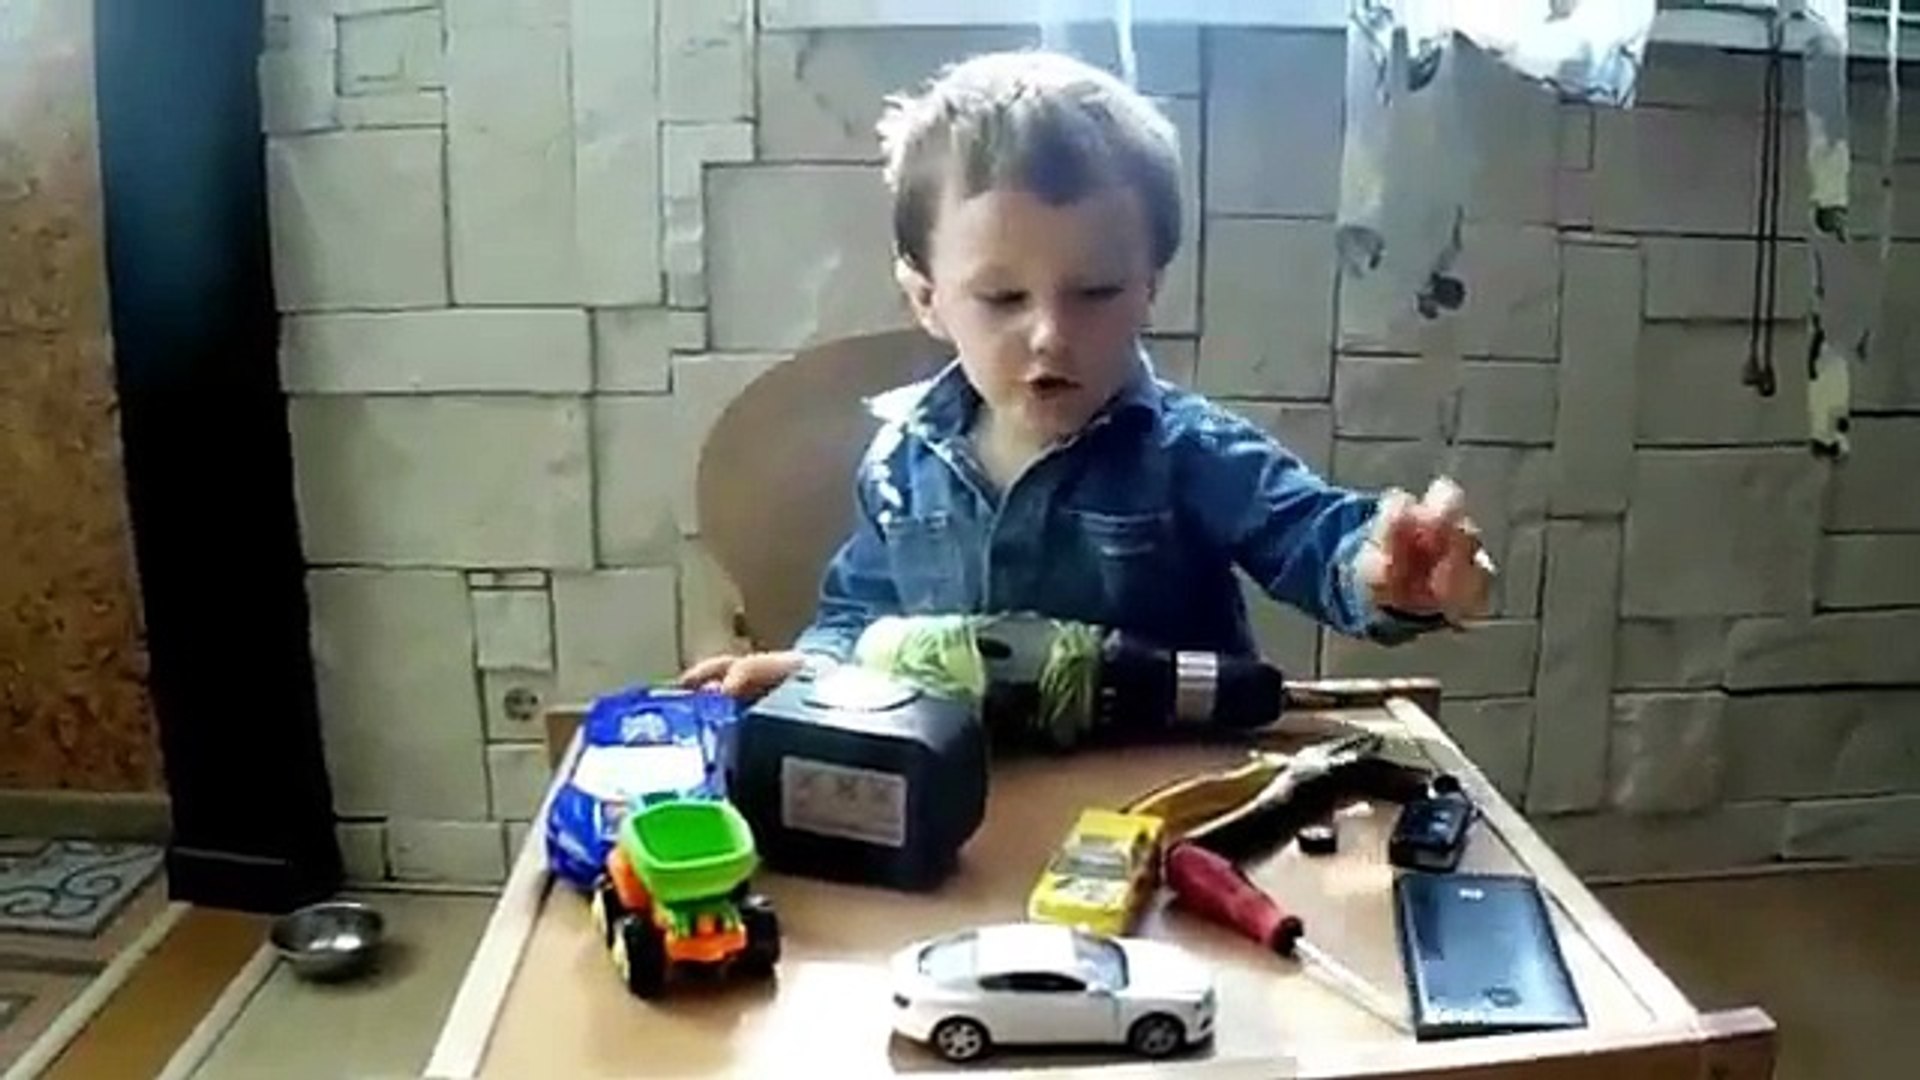 BAD BABY BOY DRIVES CAR. FUNNY HOME VIDEOS. FUNNY MUSIC VIDEOS FOR KIDS